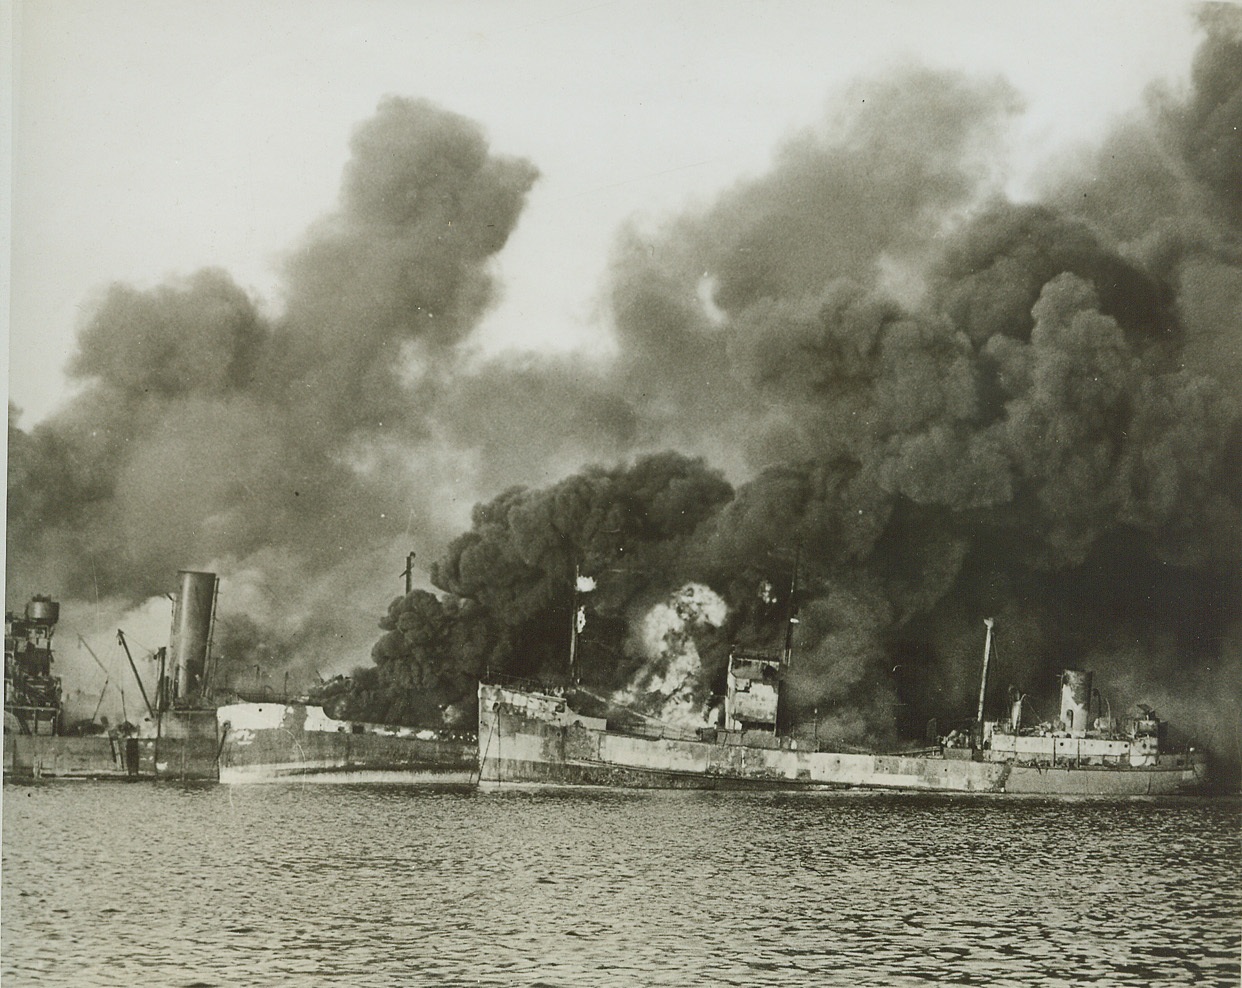 Axis Attack on Bari, 12/16/1943. Allied ships burn furiously in the Southern Italian port of Bari following a German air raid on Dec. 2, 1943. Secretary of War Stimson today announced that two ammunitions ships were hit, and the resultant explosion caused spreading fires which destroyed or damaged a number of Allied cargo ships and small harbor craft. There were an estimated 1,000 casualties, including 37 American naval personnel. U.S. Army Signal Corps Photo From (ACME);